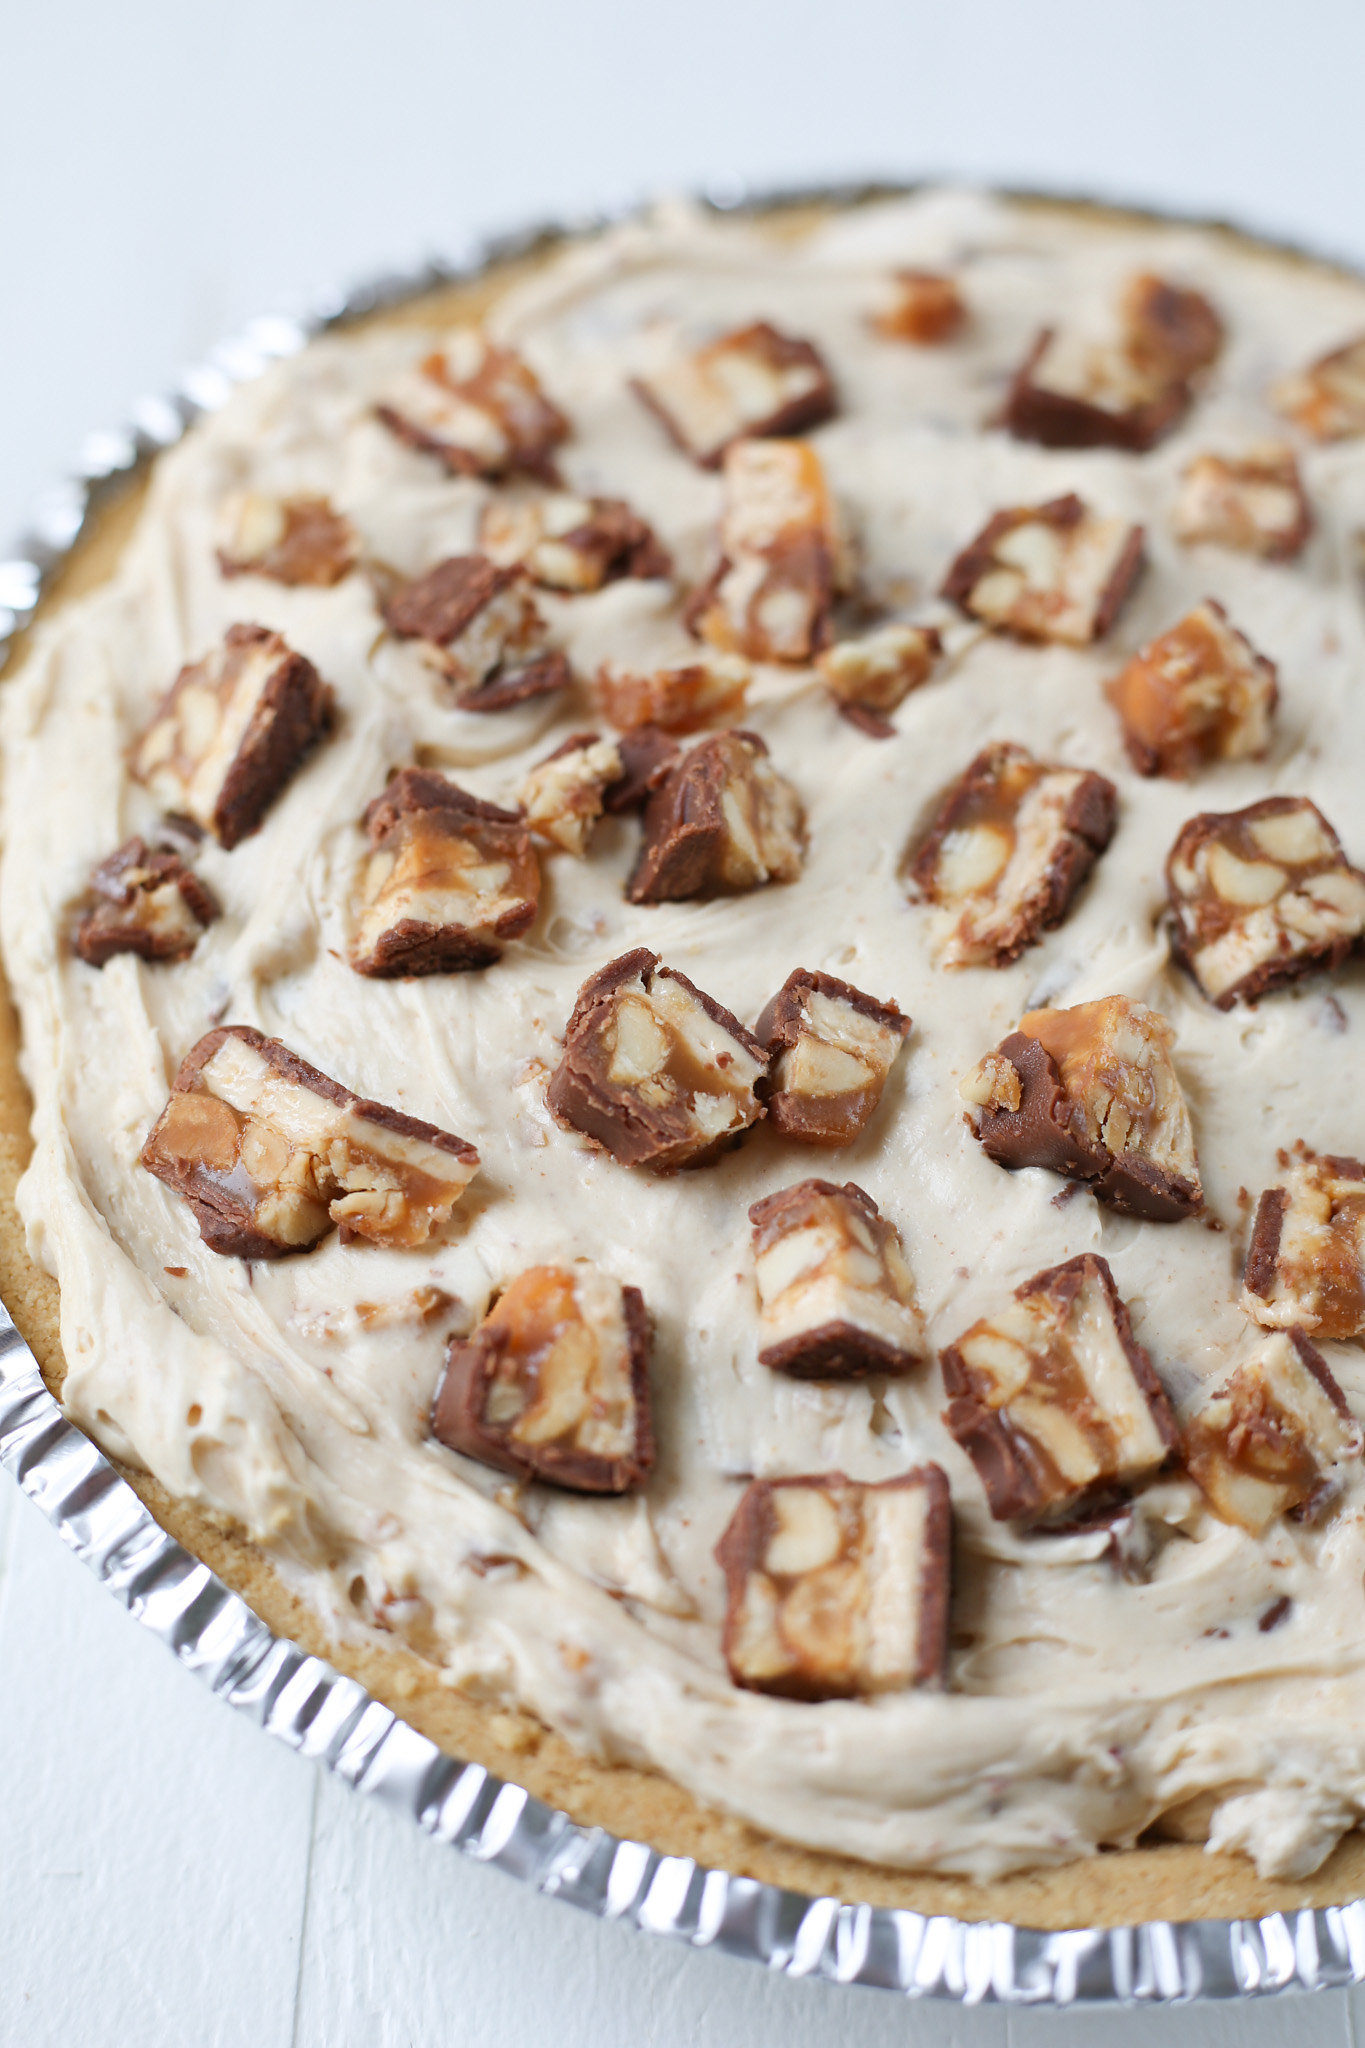 No bake peanut butter pie with chopped Snickers bars